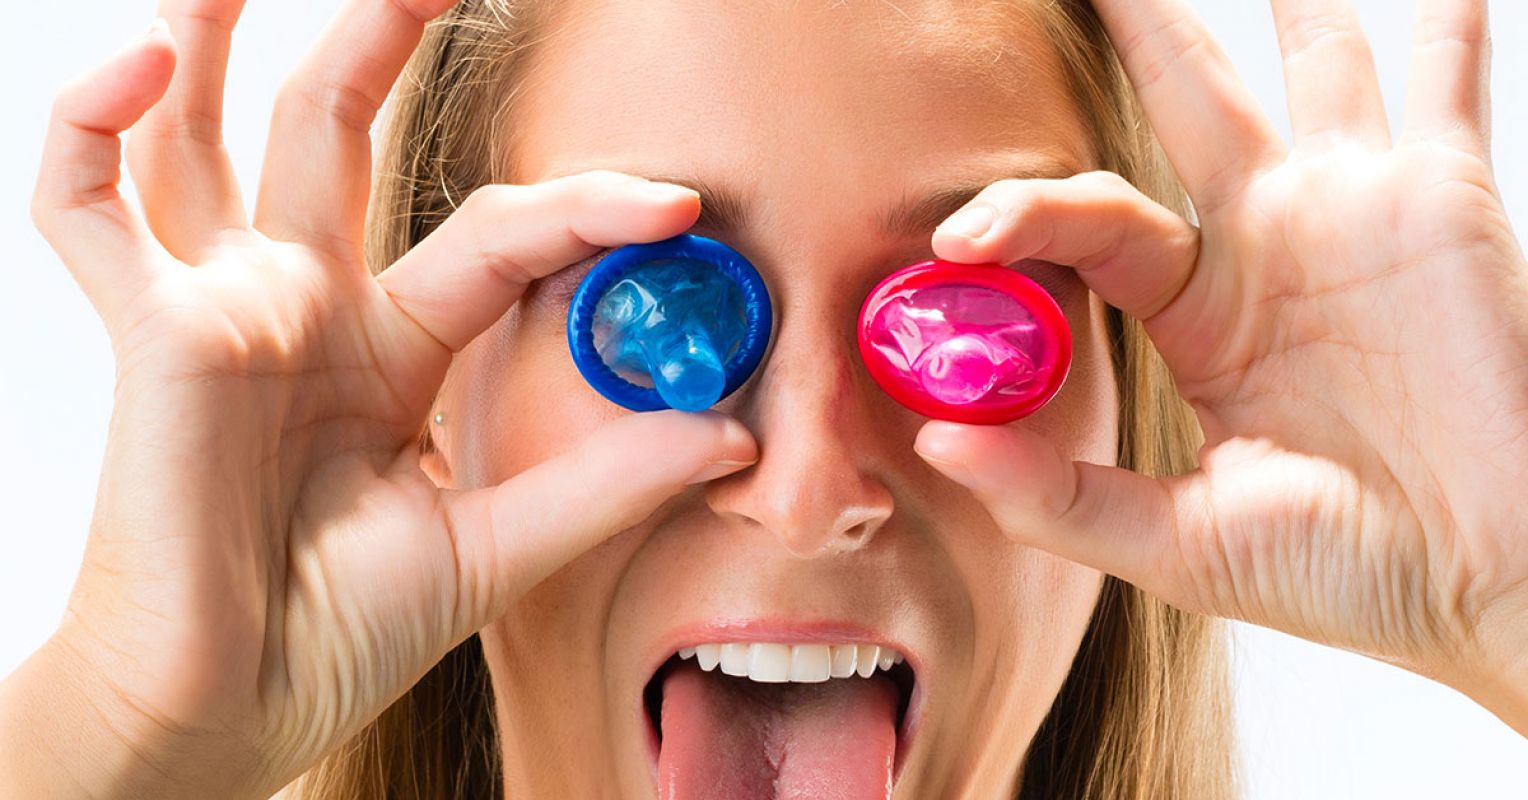 Women Don't Like How Condoms Feel Any More Than Men Do | Psychology Today